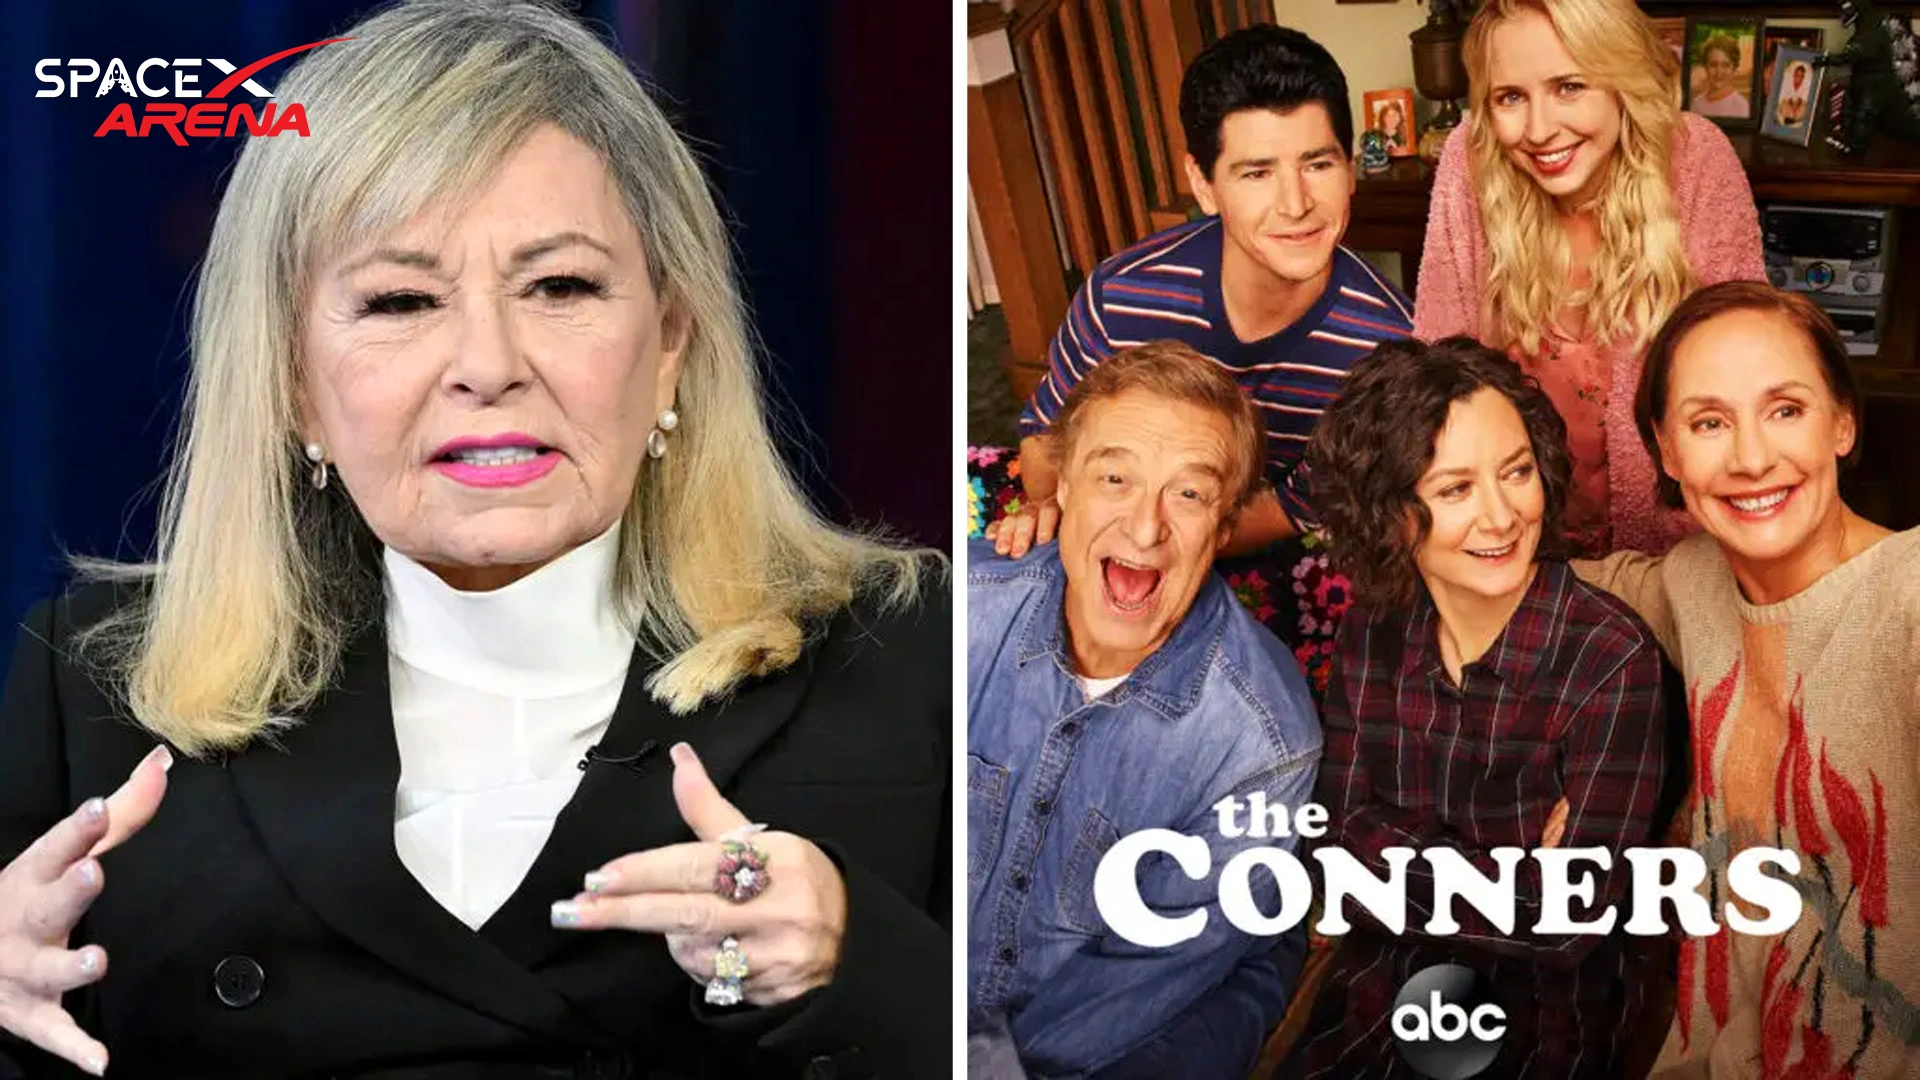 The premiere of Roseanne drew more viewers than the previous season of "The Conners